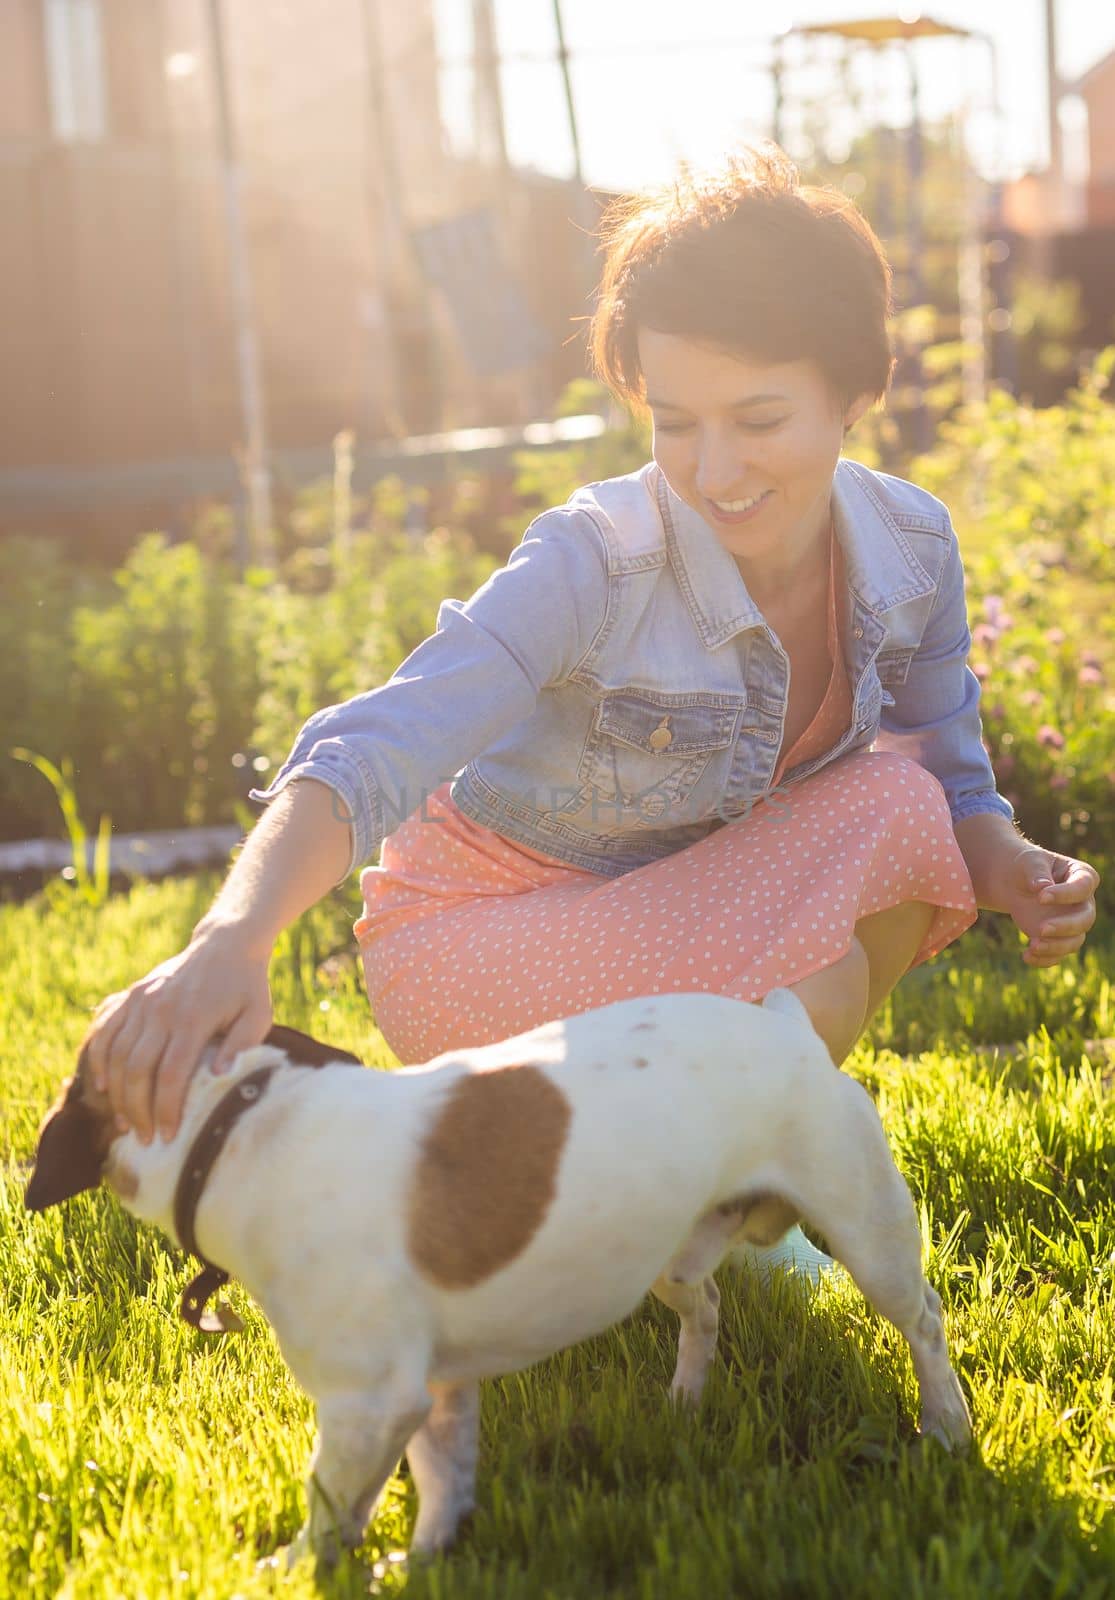 Young woman plays with her dog on the grass on backyard. The concept of animals and friendship or pet owner and love.